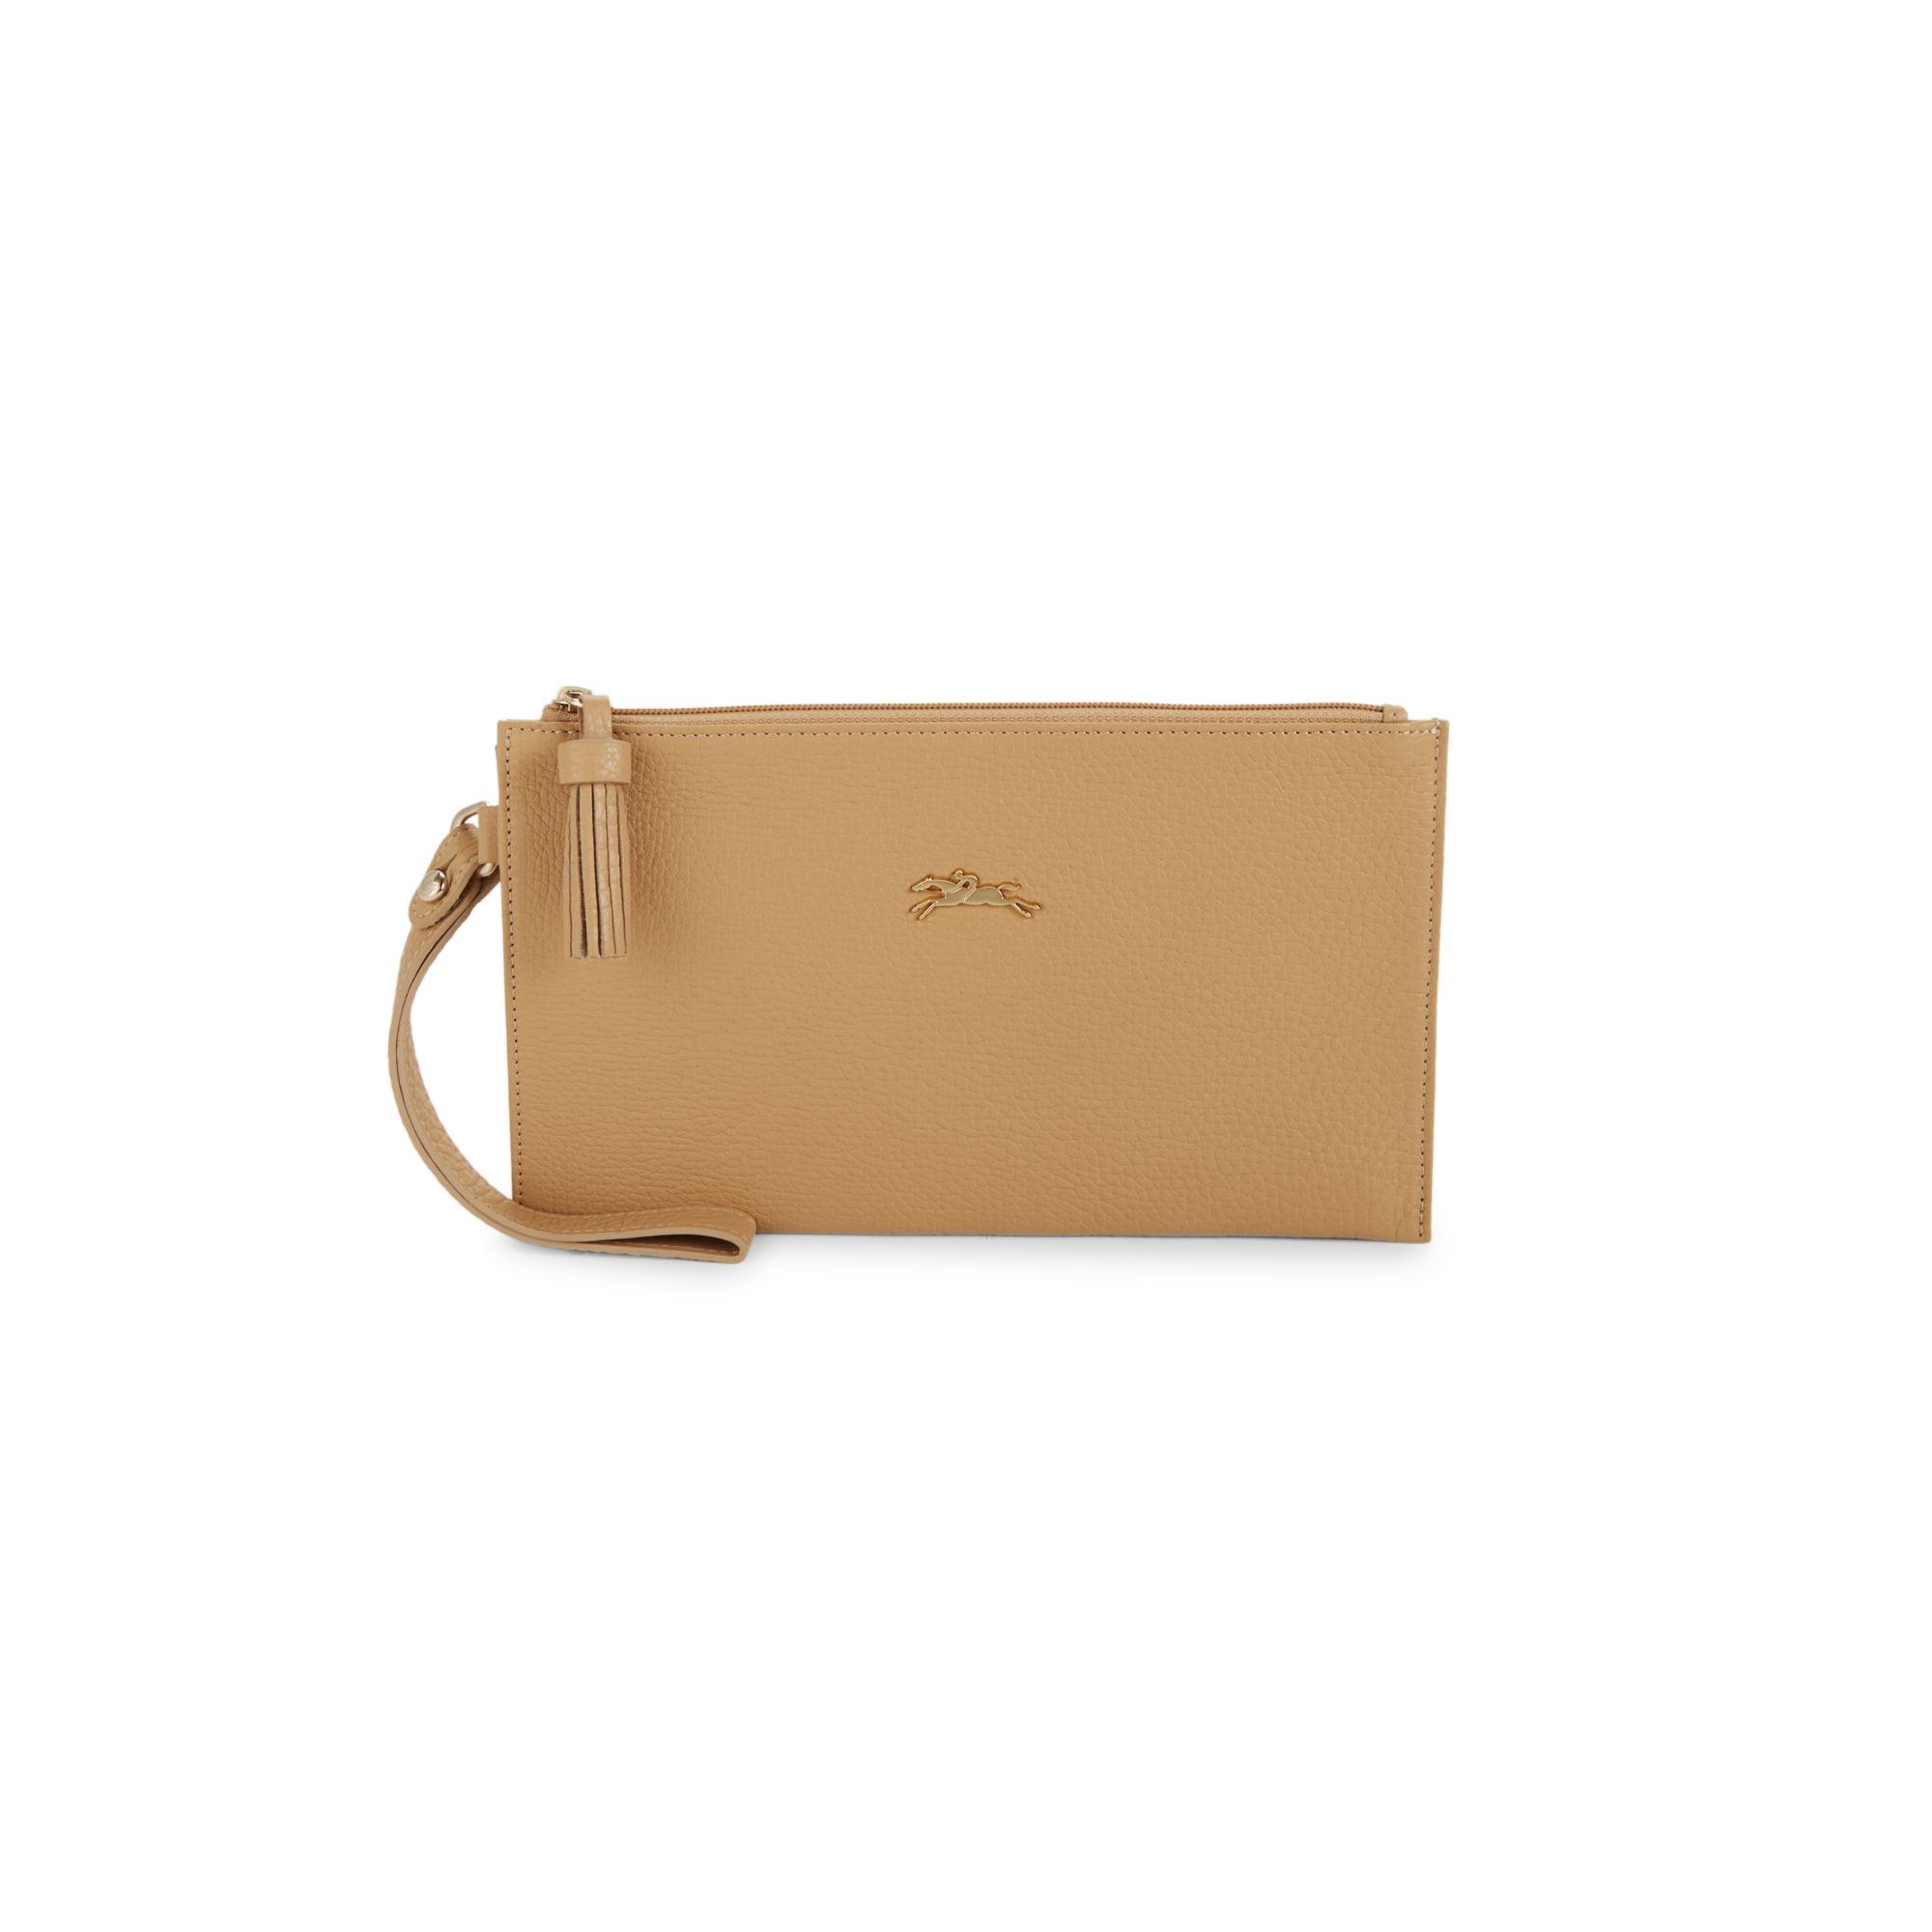 Longchamp Penelope Pebble Leather Wristlet Pouch in Natural | Lyst